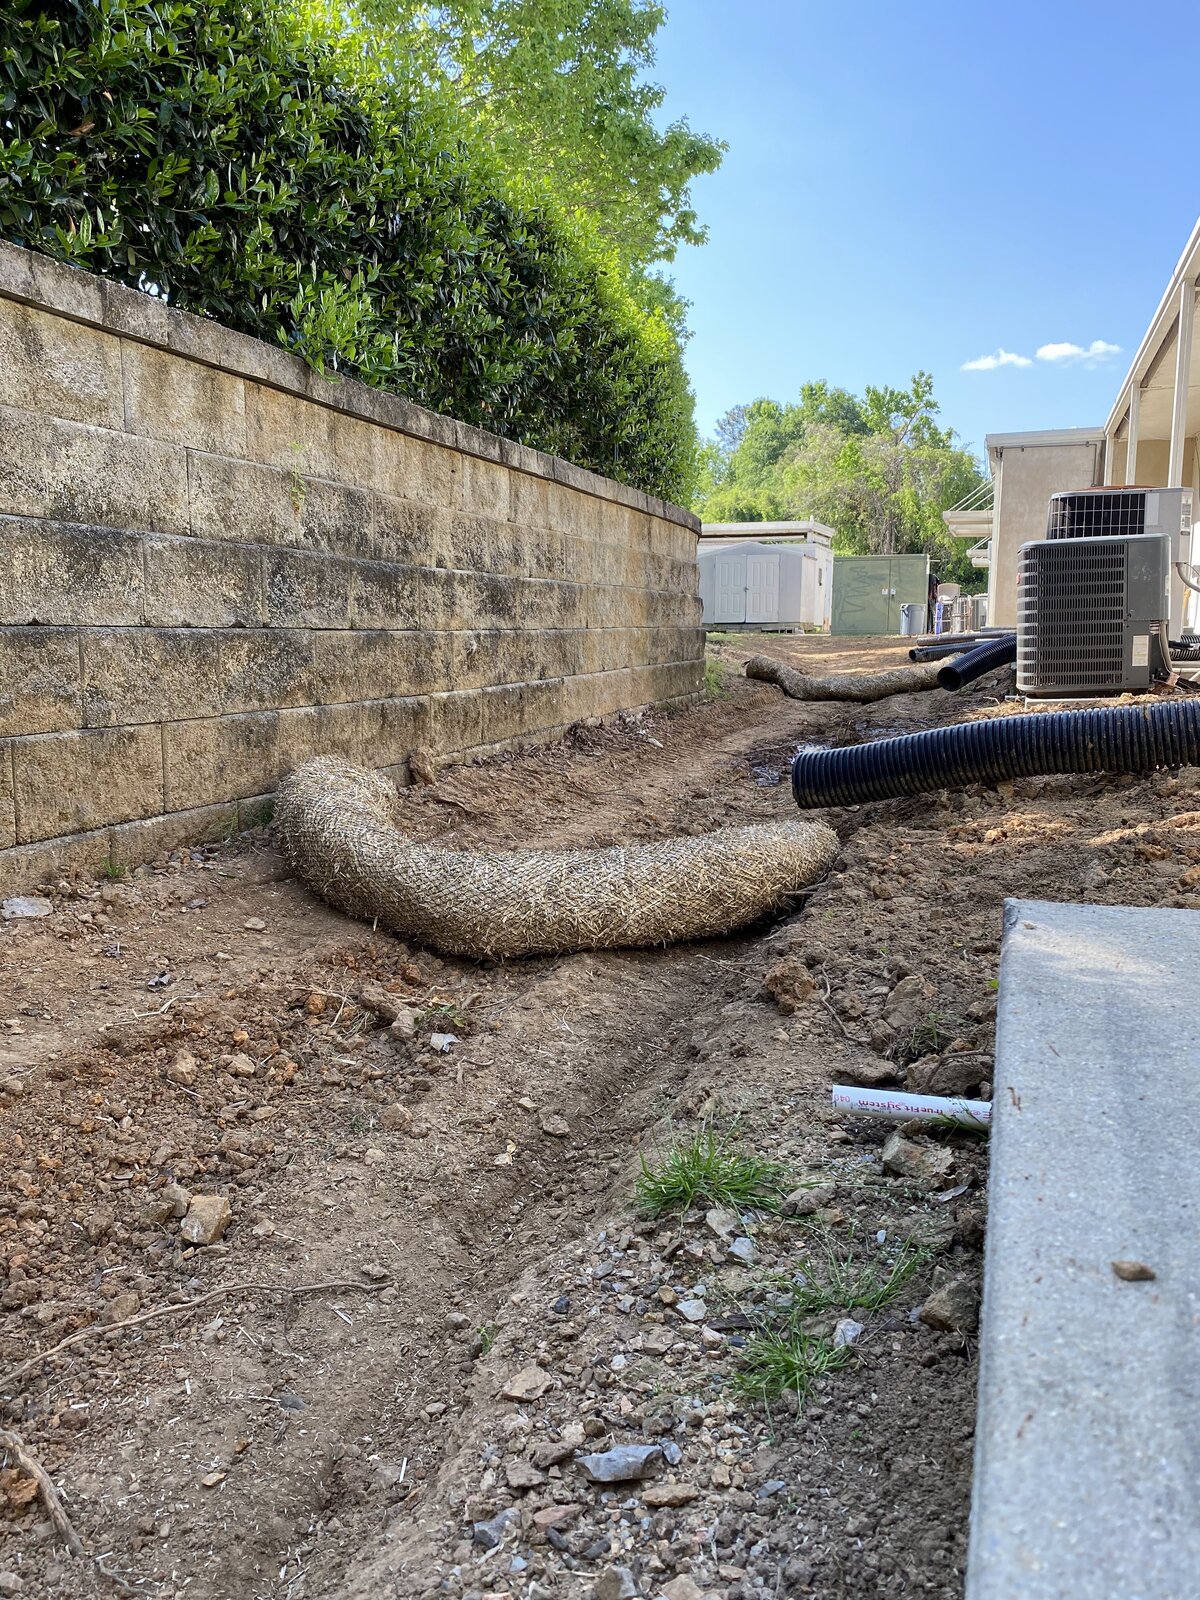 large-hose-on-dirt-floor-next-to-stone-wall